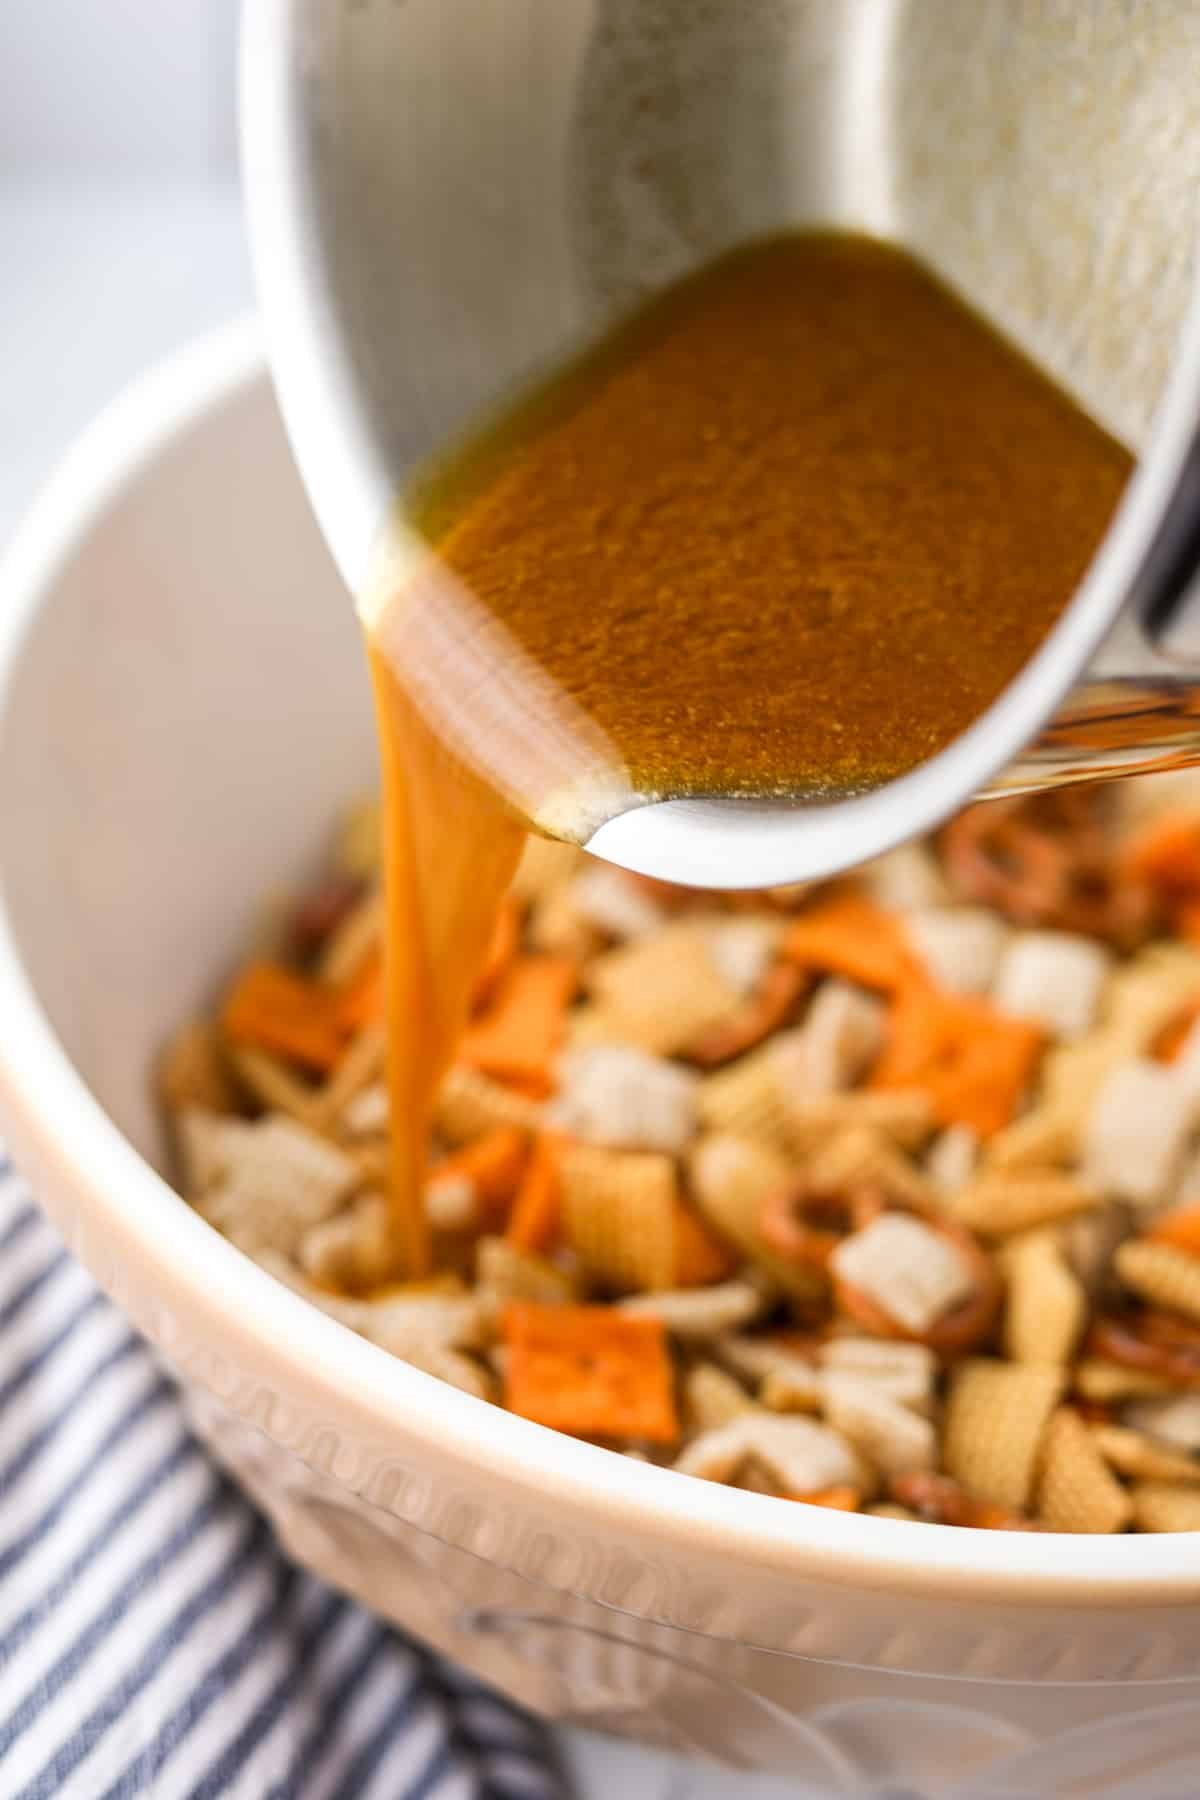 Pouring melted butter into a bowl of snack mix.